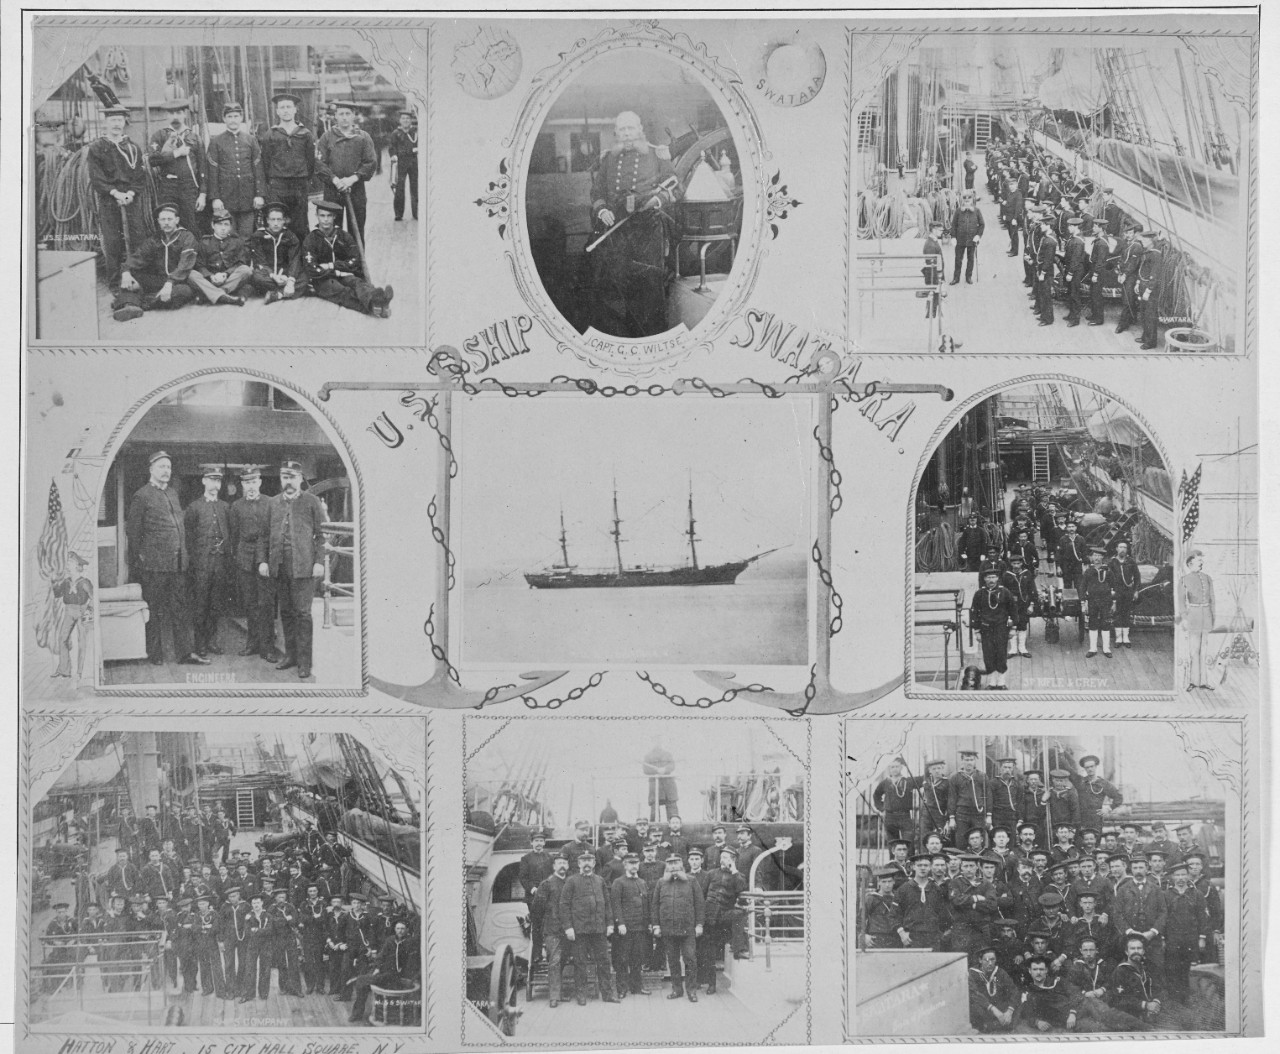 Men and officers of the USS SWATARA (1874-1896) with Captain Gilbert C. Wiltse commanding, 1884. 